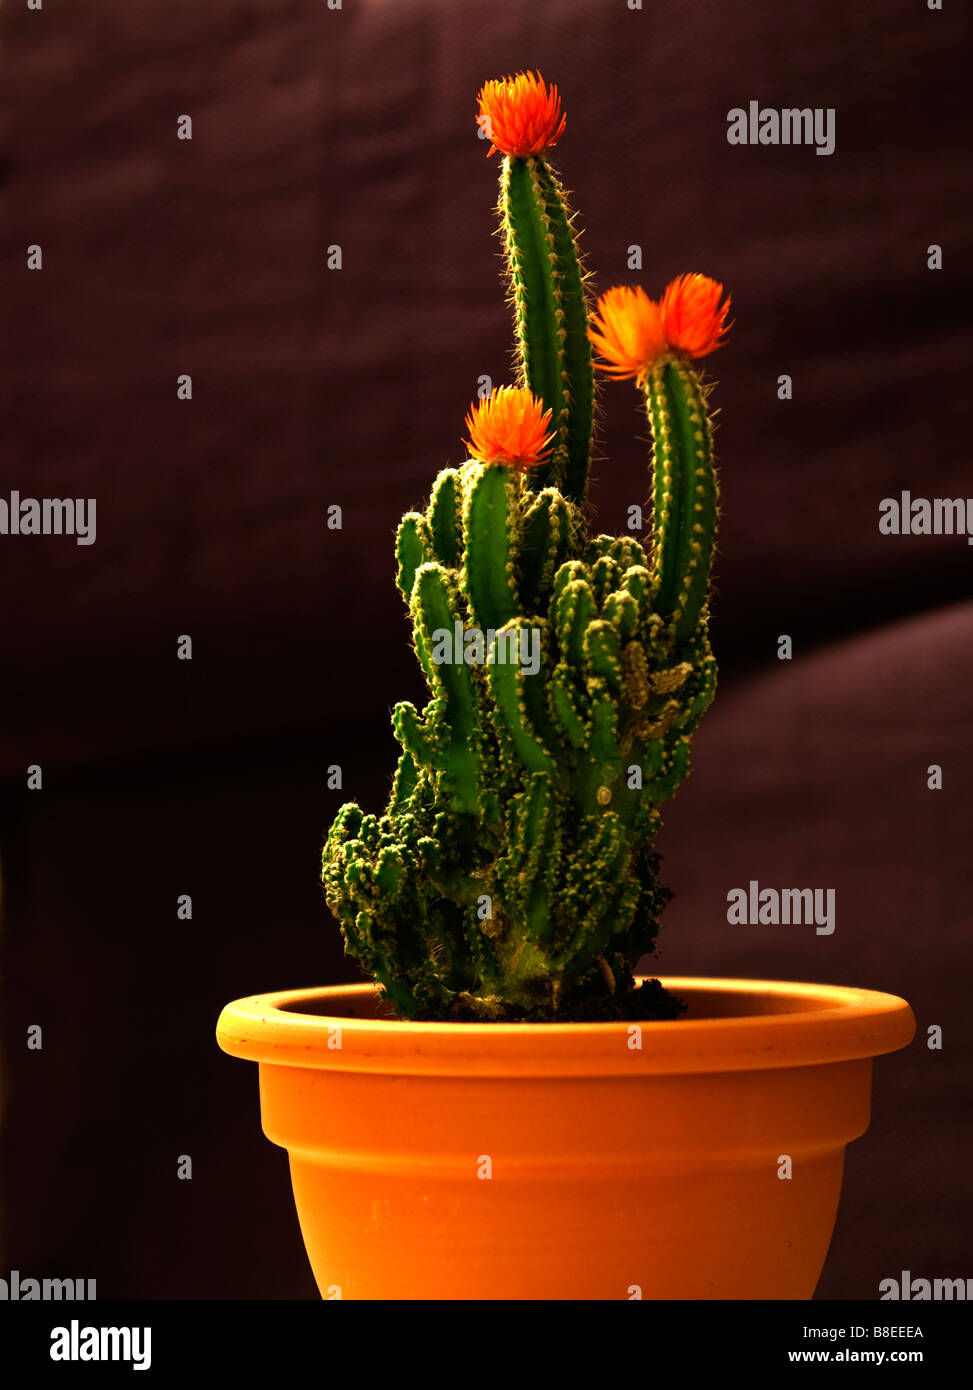 picture of a cactus having red flowers. Stock Photo